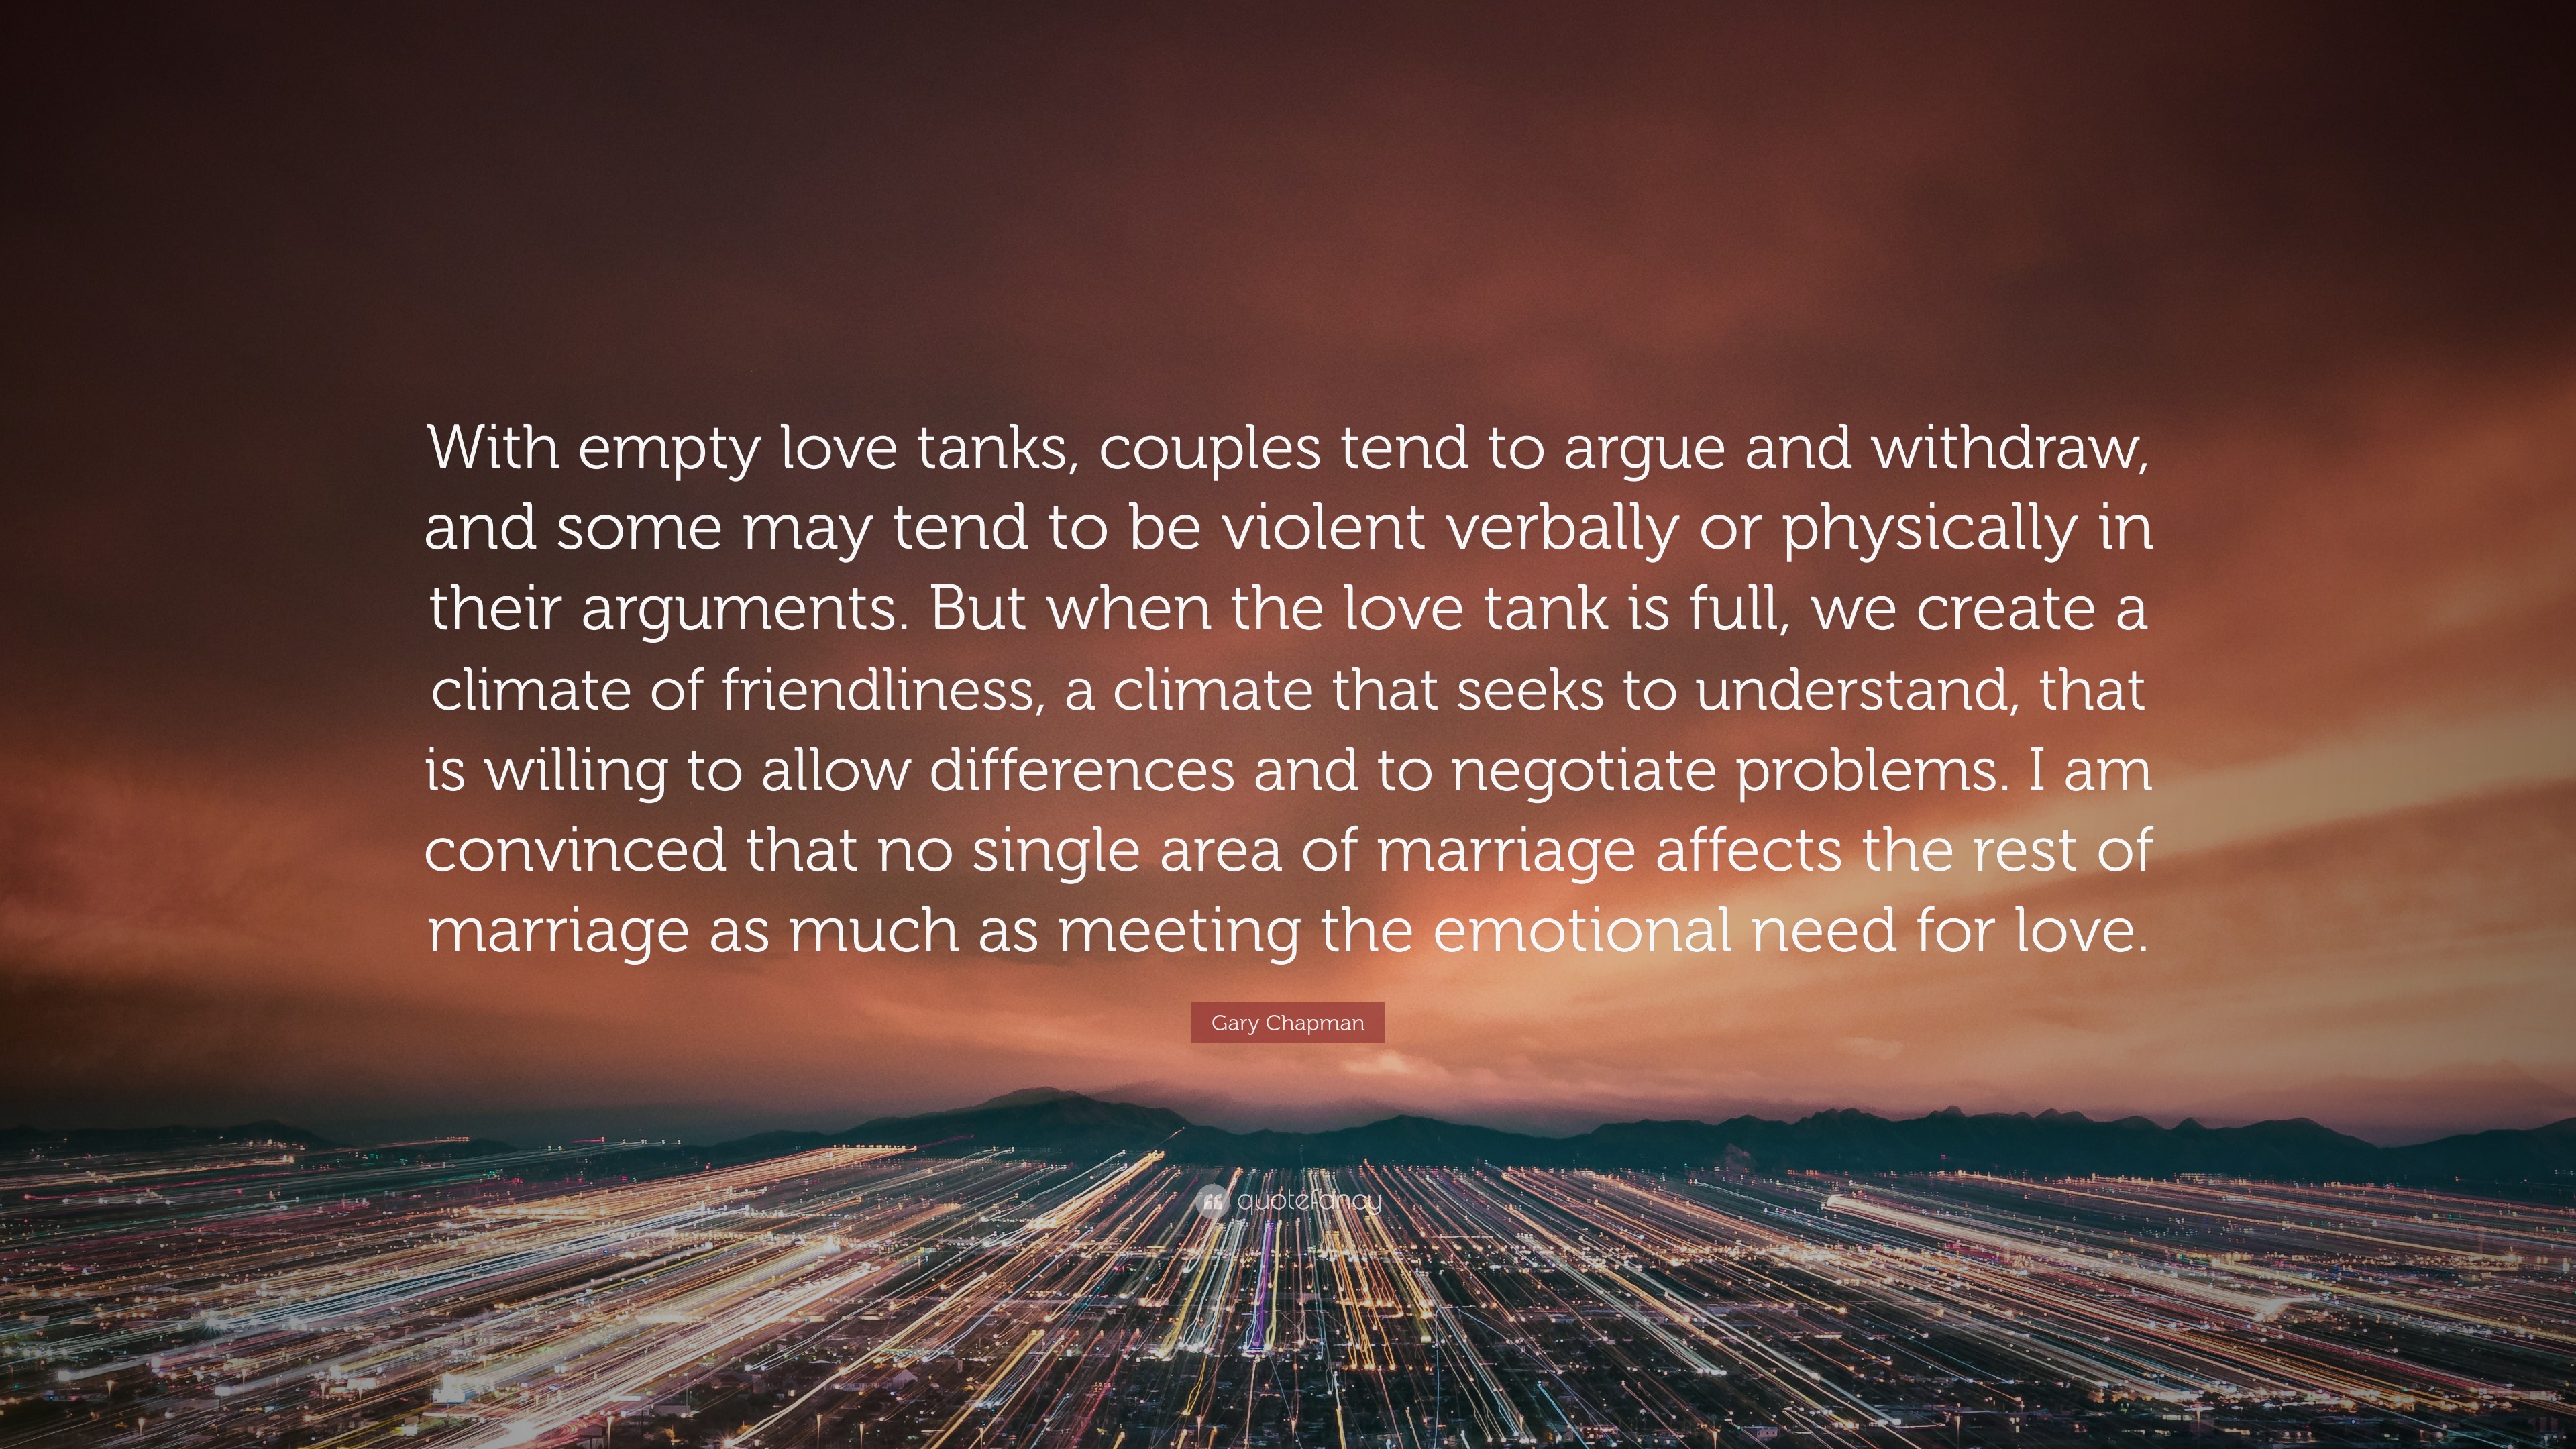 https://quotefancy.com/media/wallpaper/3840x2160/7507169-Gary-Chapman-Quote-With-empty-love-tanks-couples-tend-to-argue-and.jpg